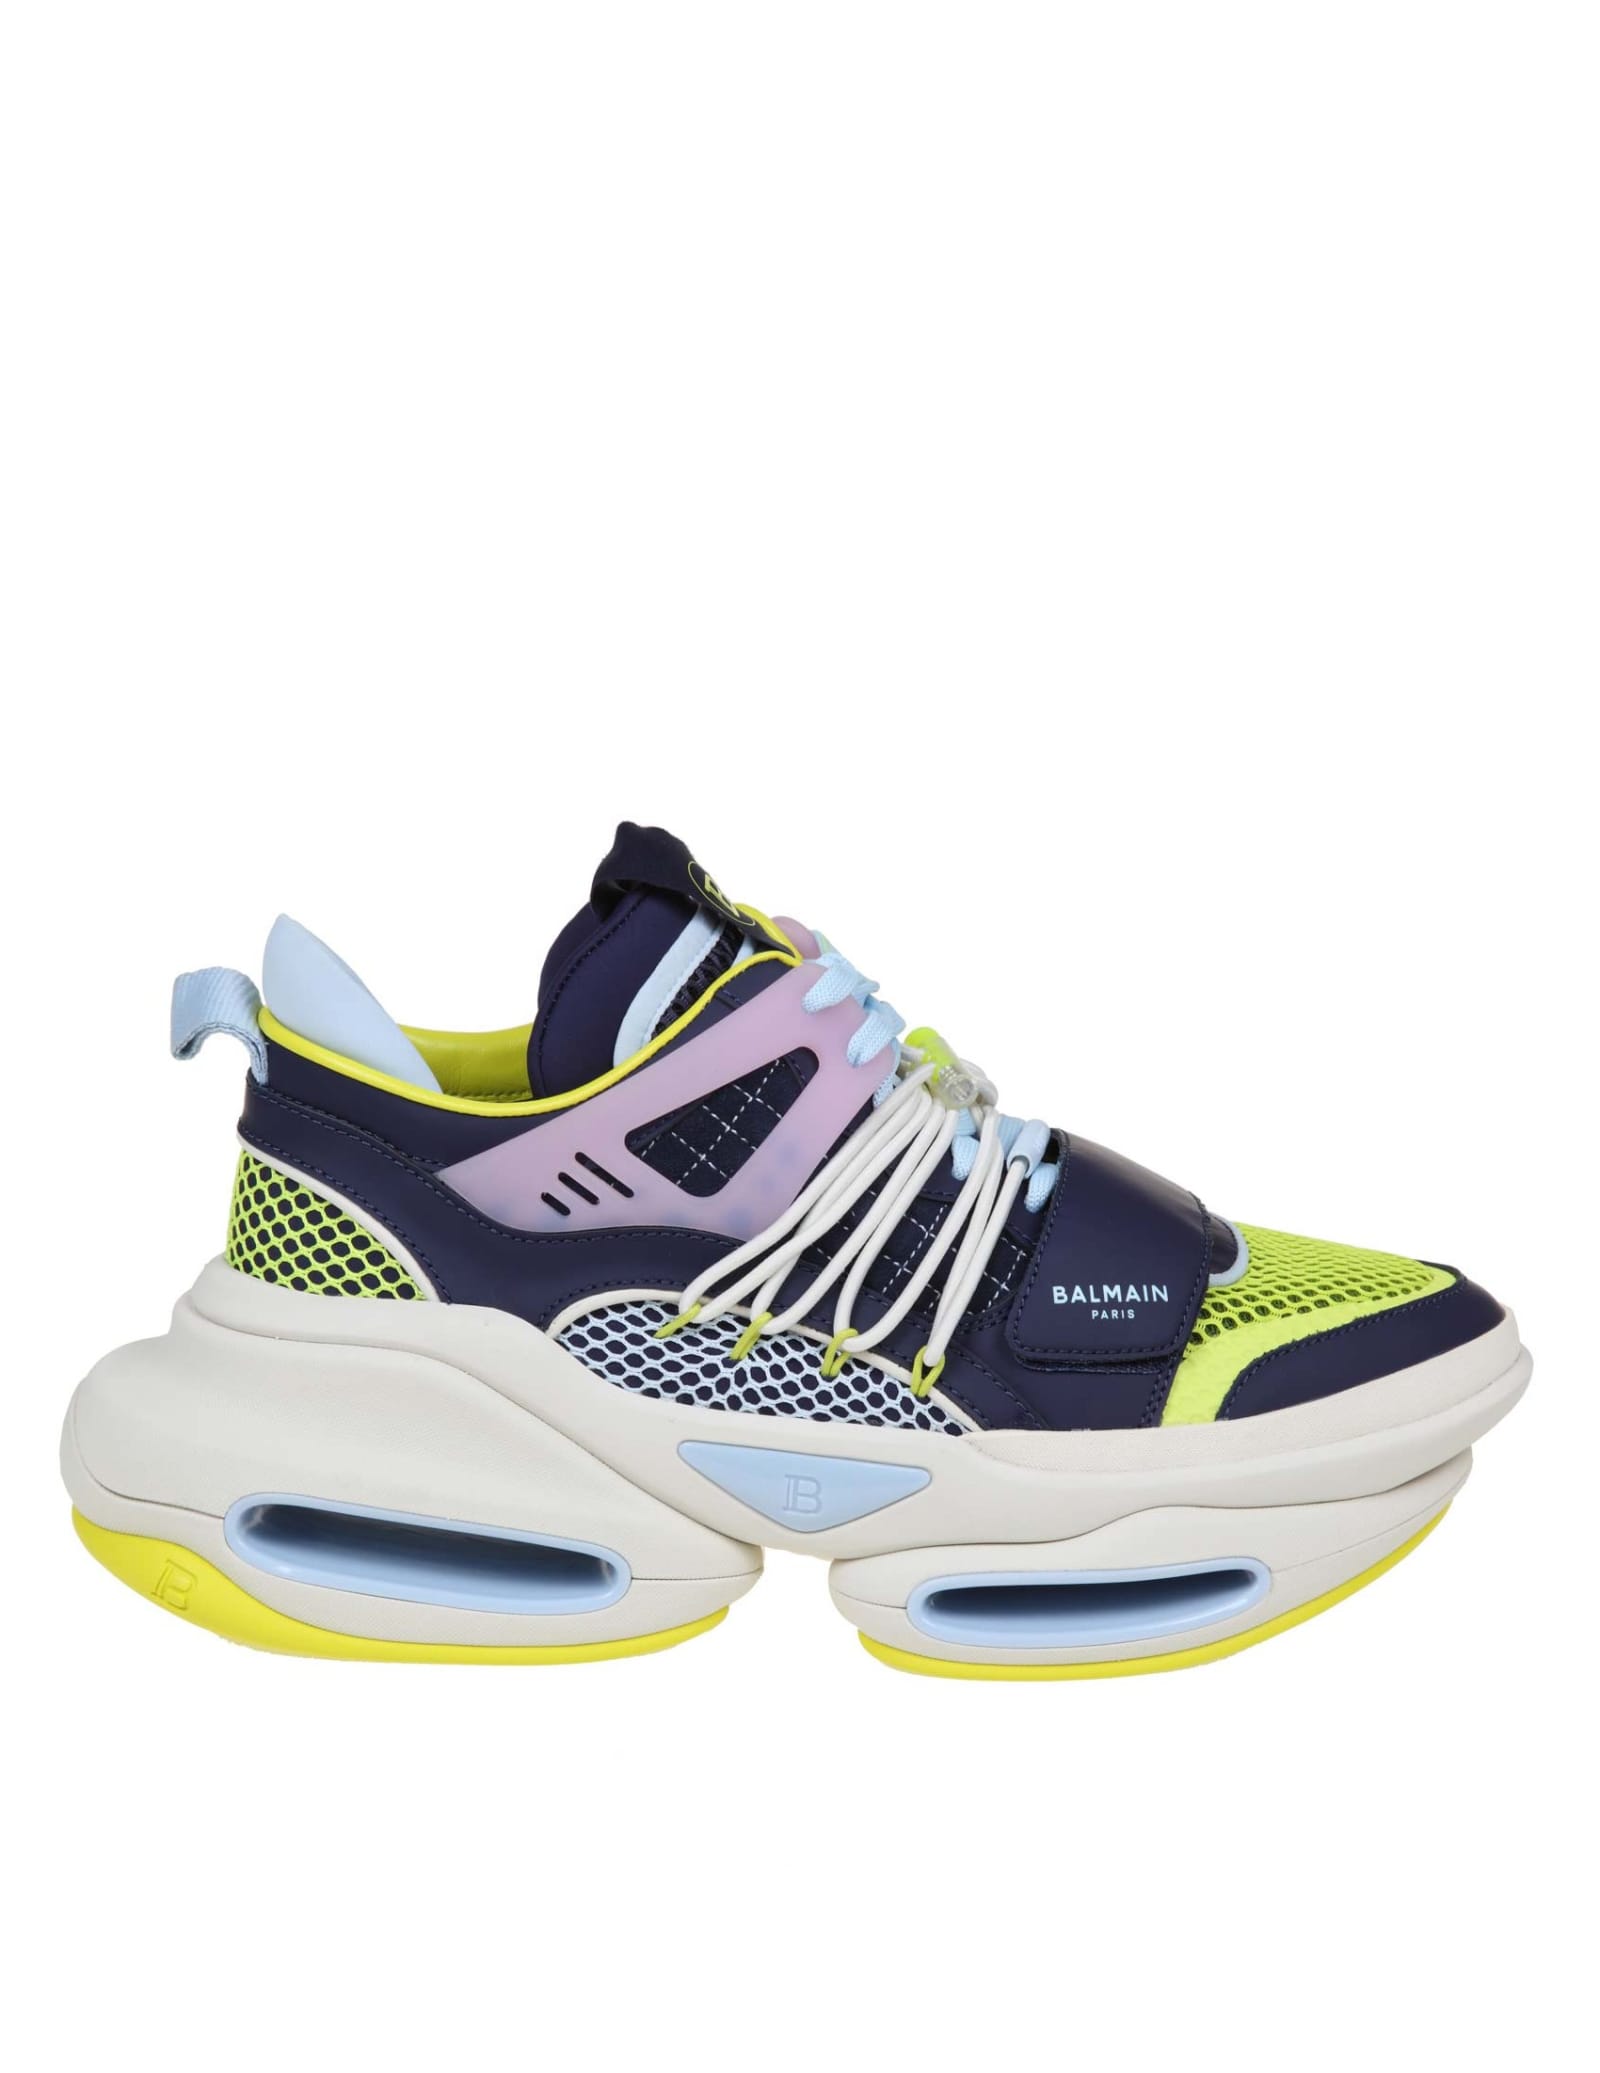 Balmain B-bold Sneakers In Multicolor Leather And Mesh